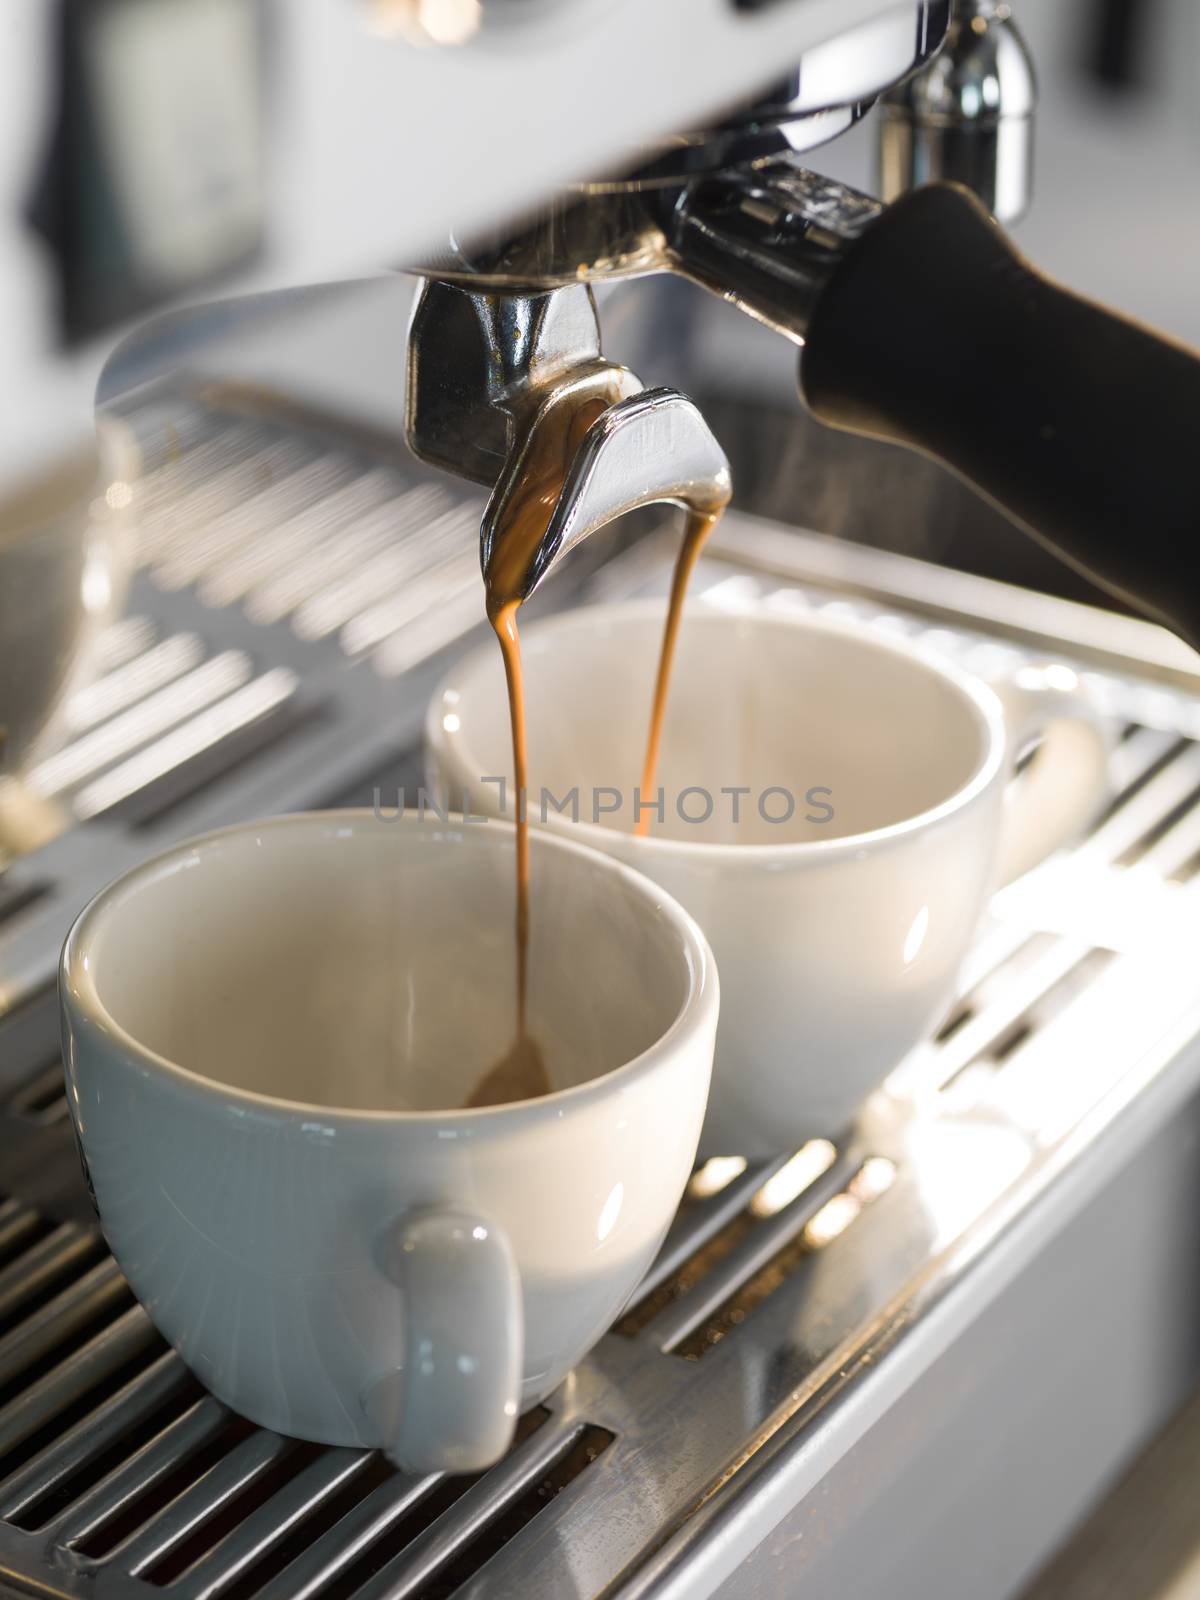 Espresso being made with a professional coffee machine. by janssenkruseproductions